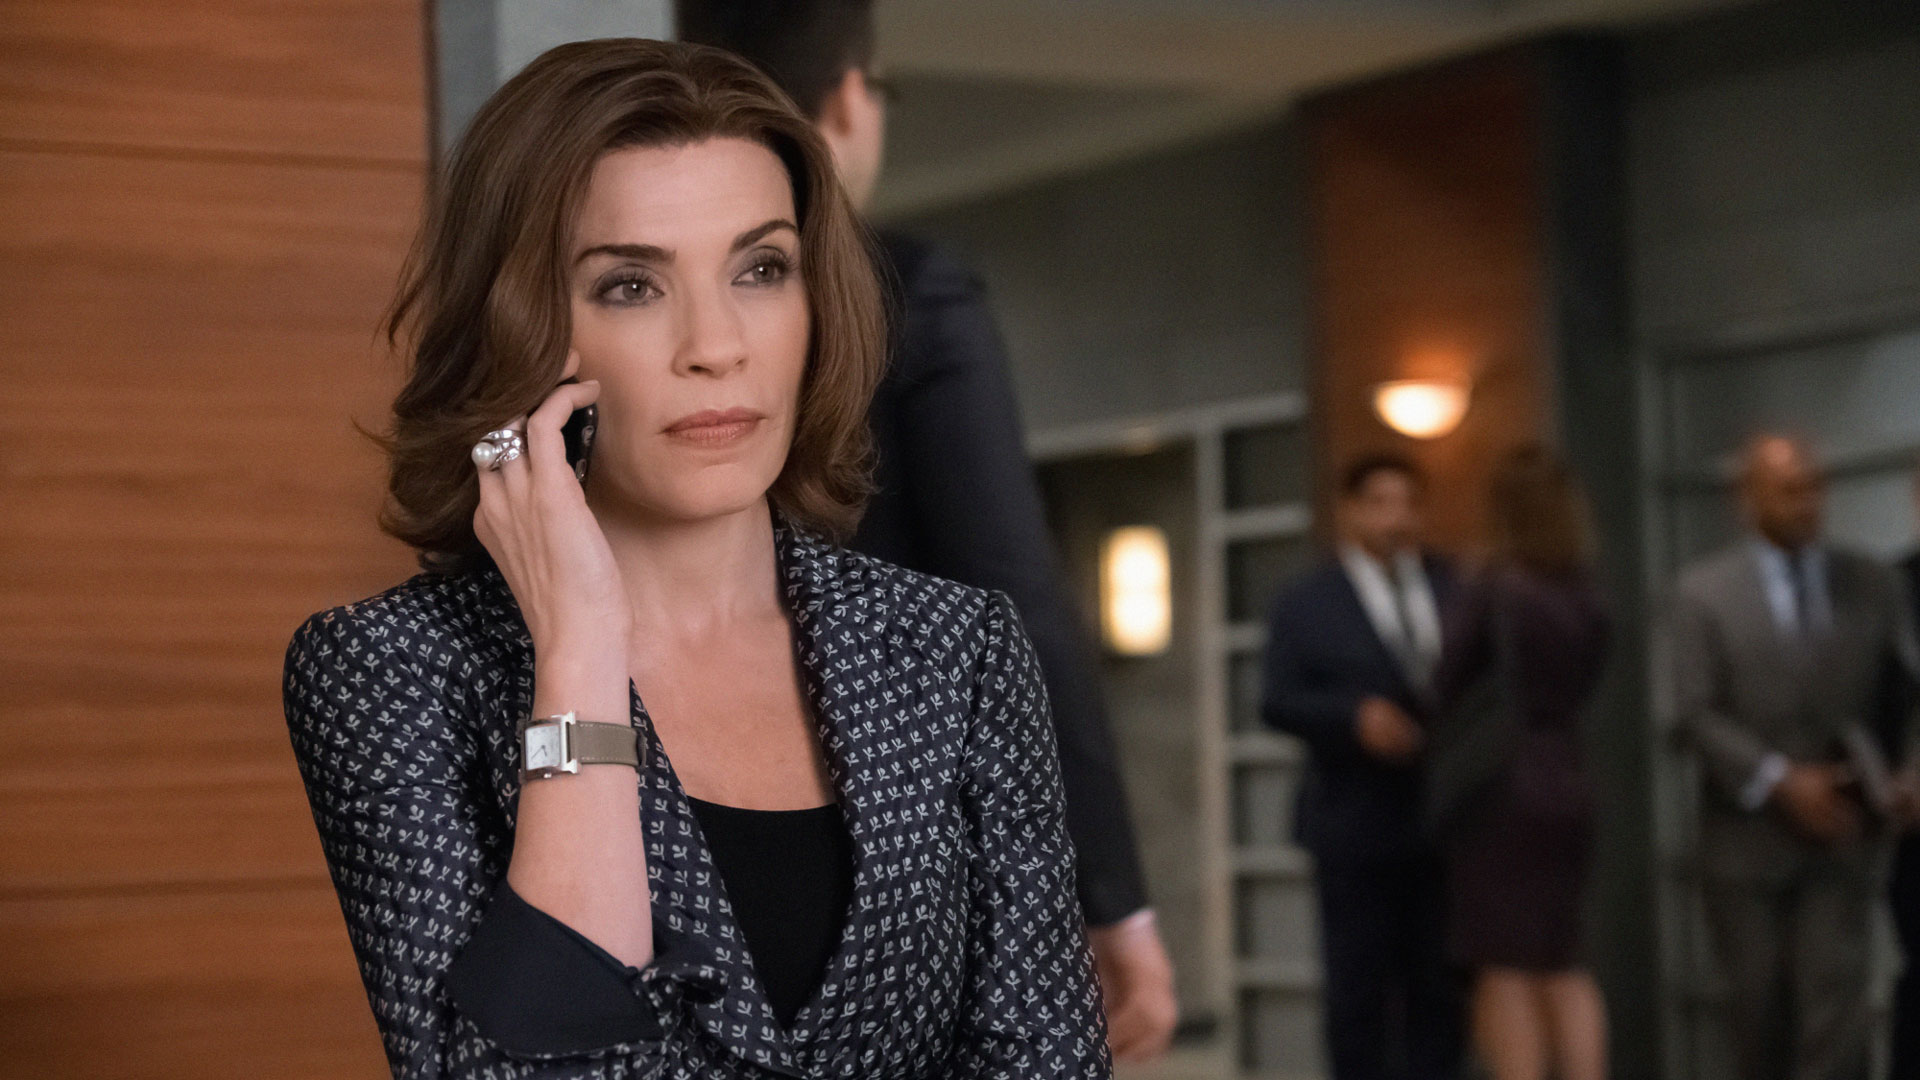 Alicia Florrick receives a call outside of court.